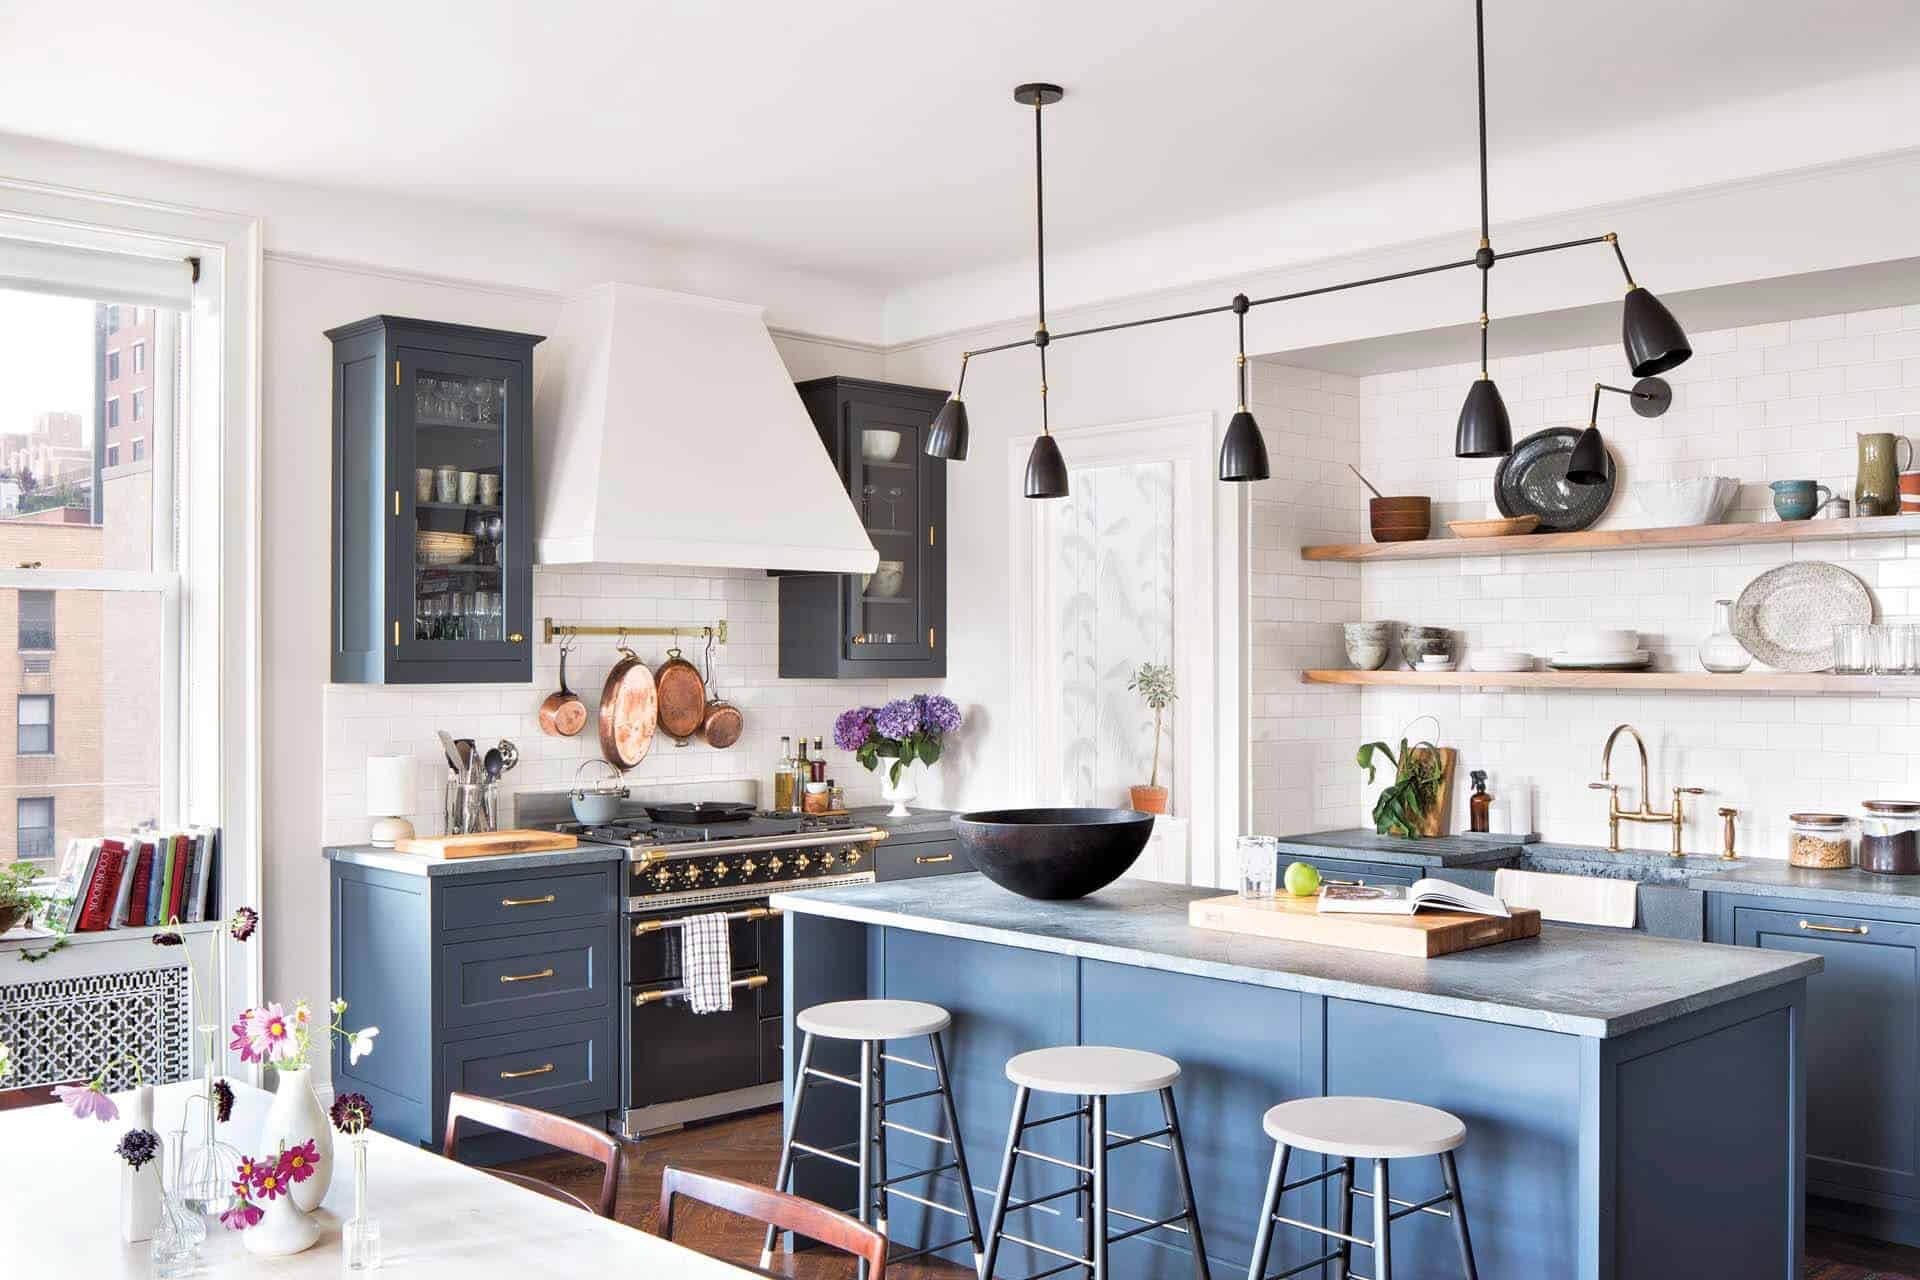 Classic New York City kitchen features blue painted Bilotta cabinets, white subway tile walls and open shelving.